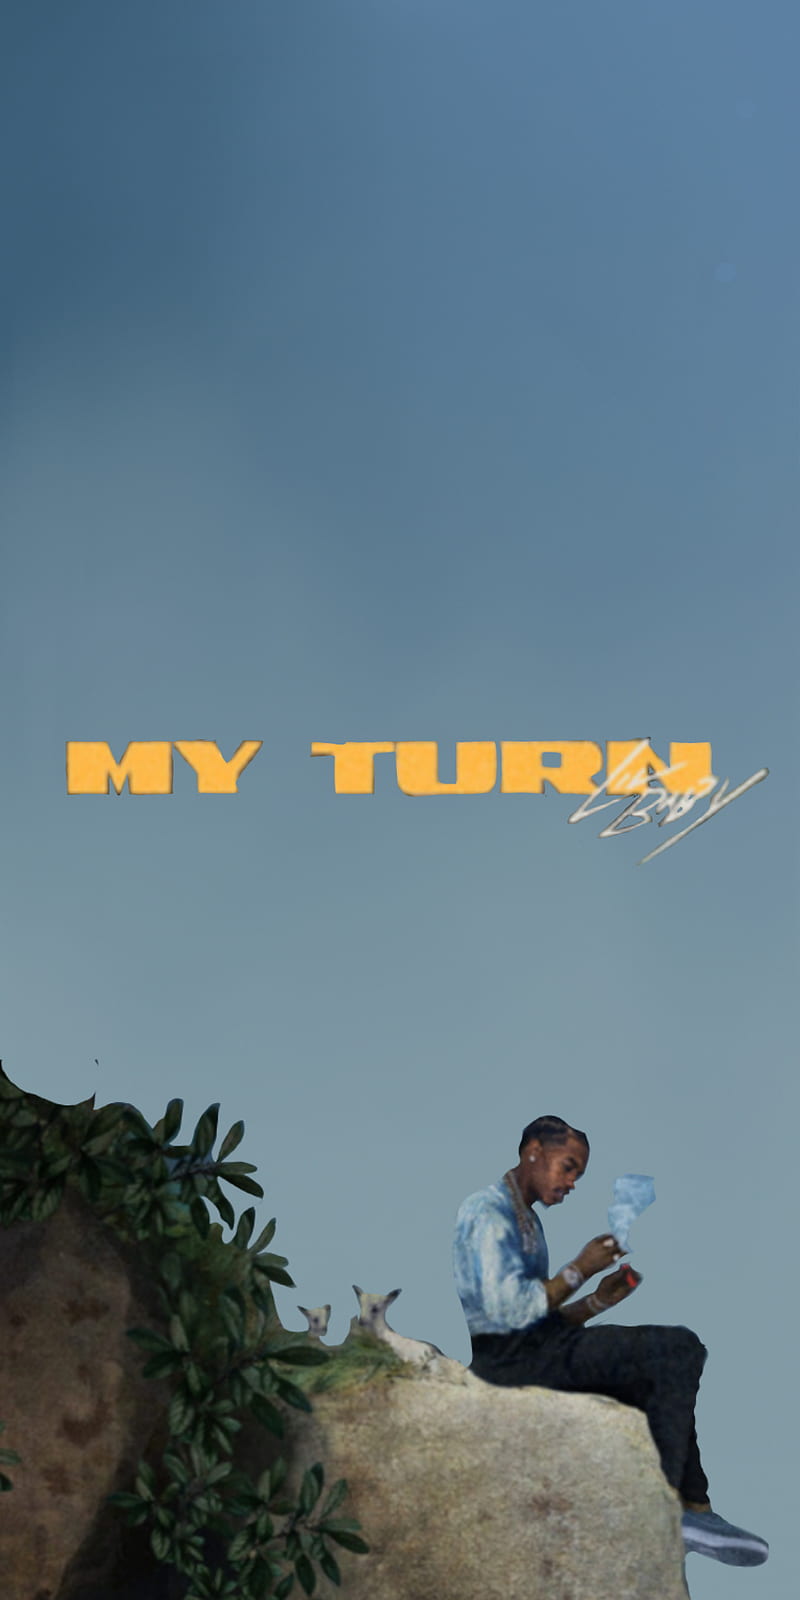 My Turn Deluxe  Play  Download All MP3 Songs WynkMusic